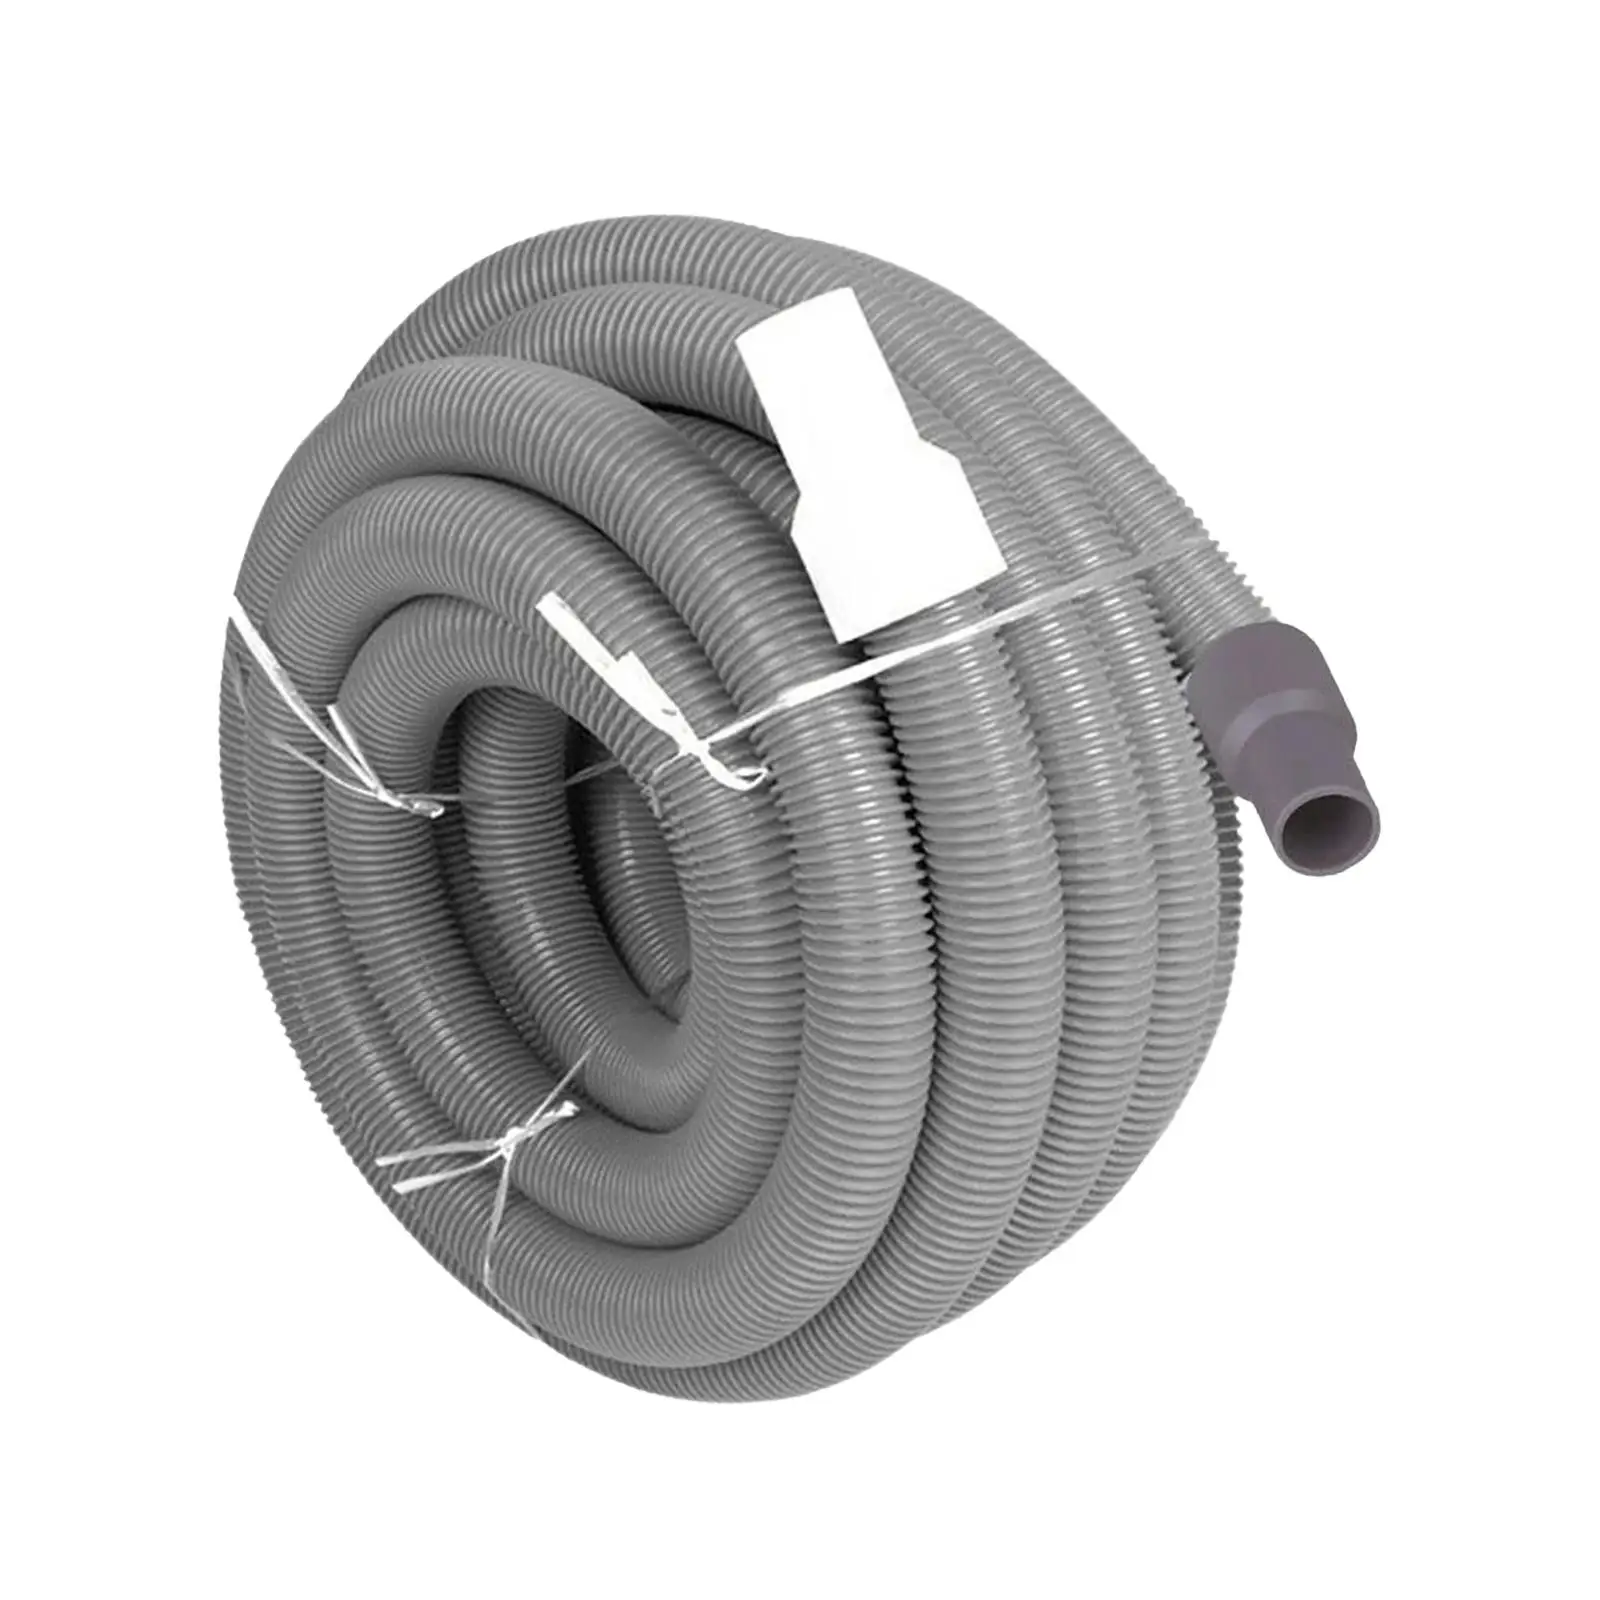 Ground Pool Vacuum Hose Connector Crush Resistant Gray for Landscape Pools